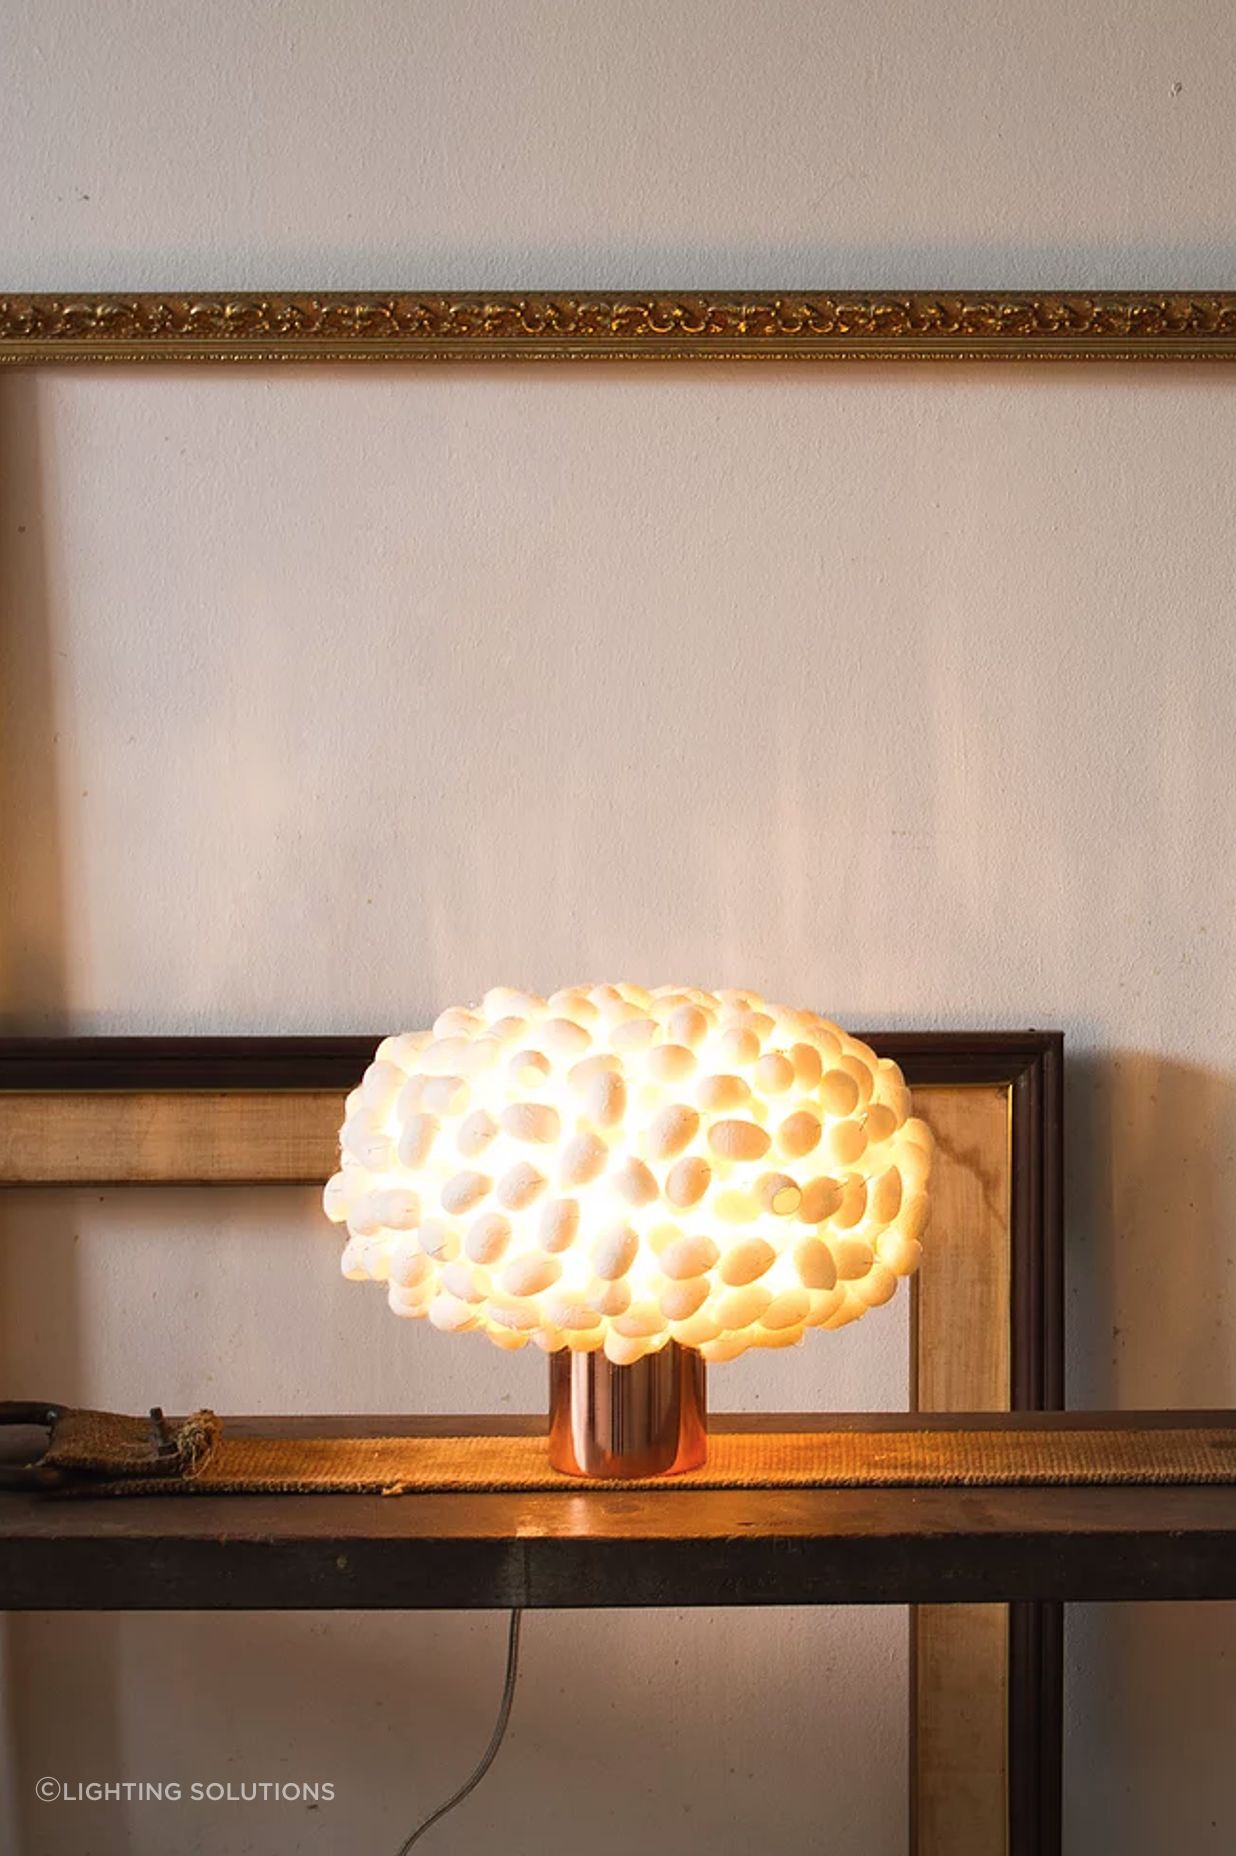 The delicately beautiful individual silk cocoons of the Unit Table C Table Lamp by Ango as a wonderful unique feature